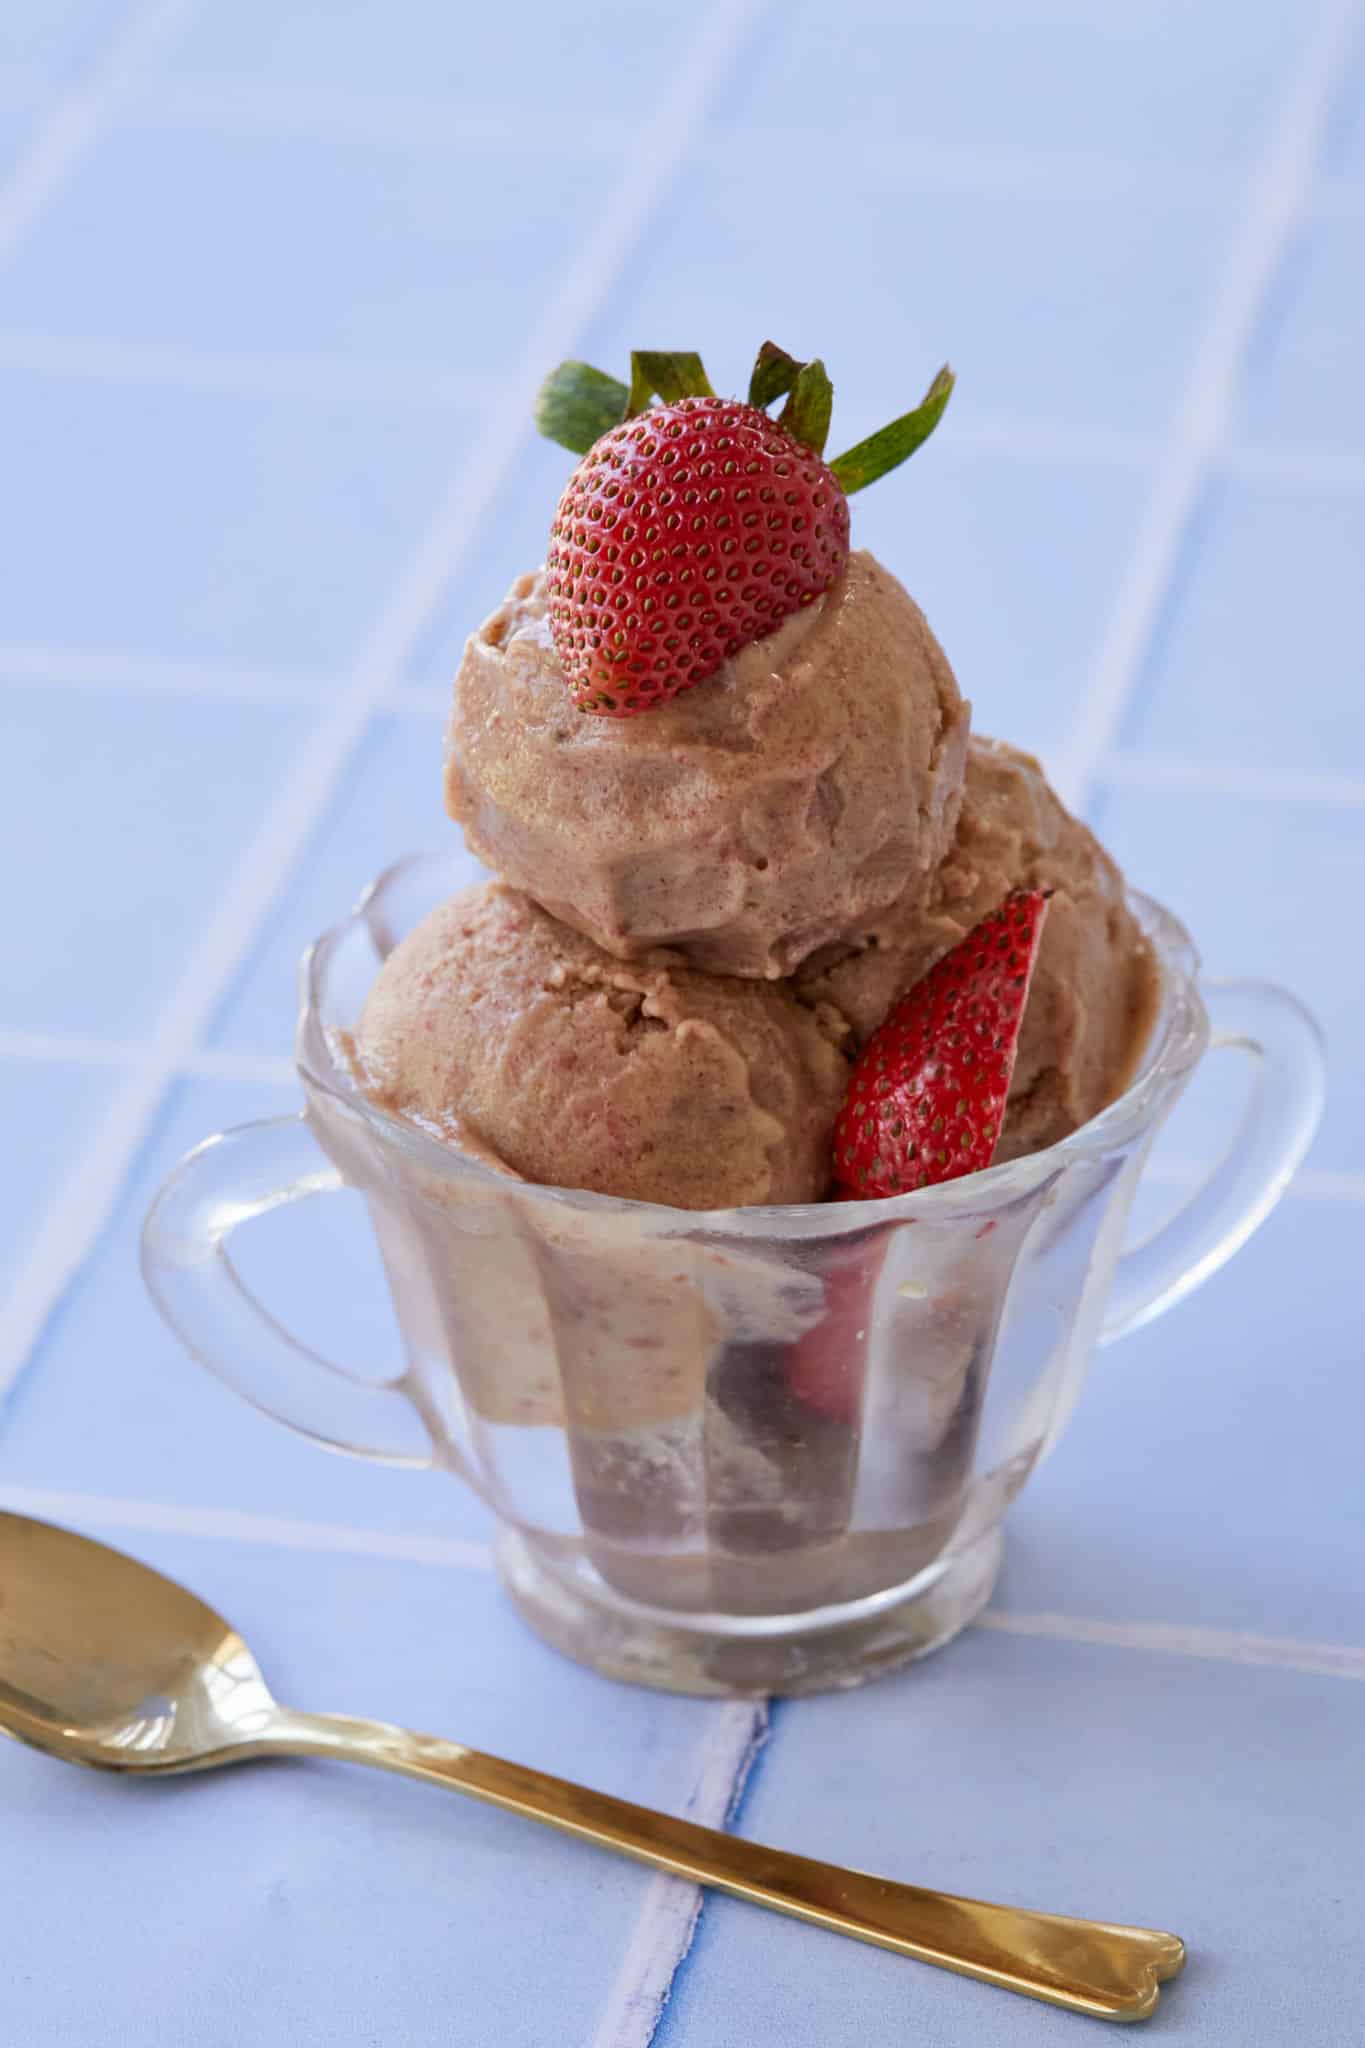 Scoops of nice cream in a jar with strawberries